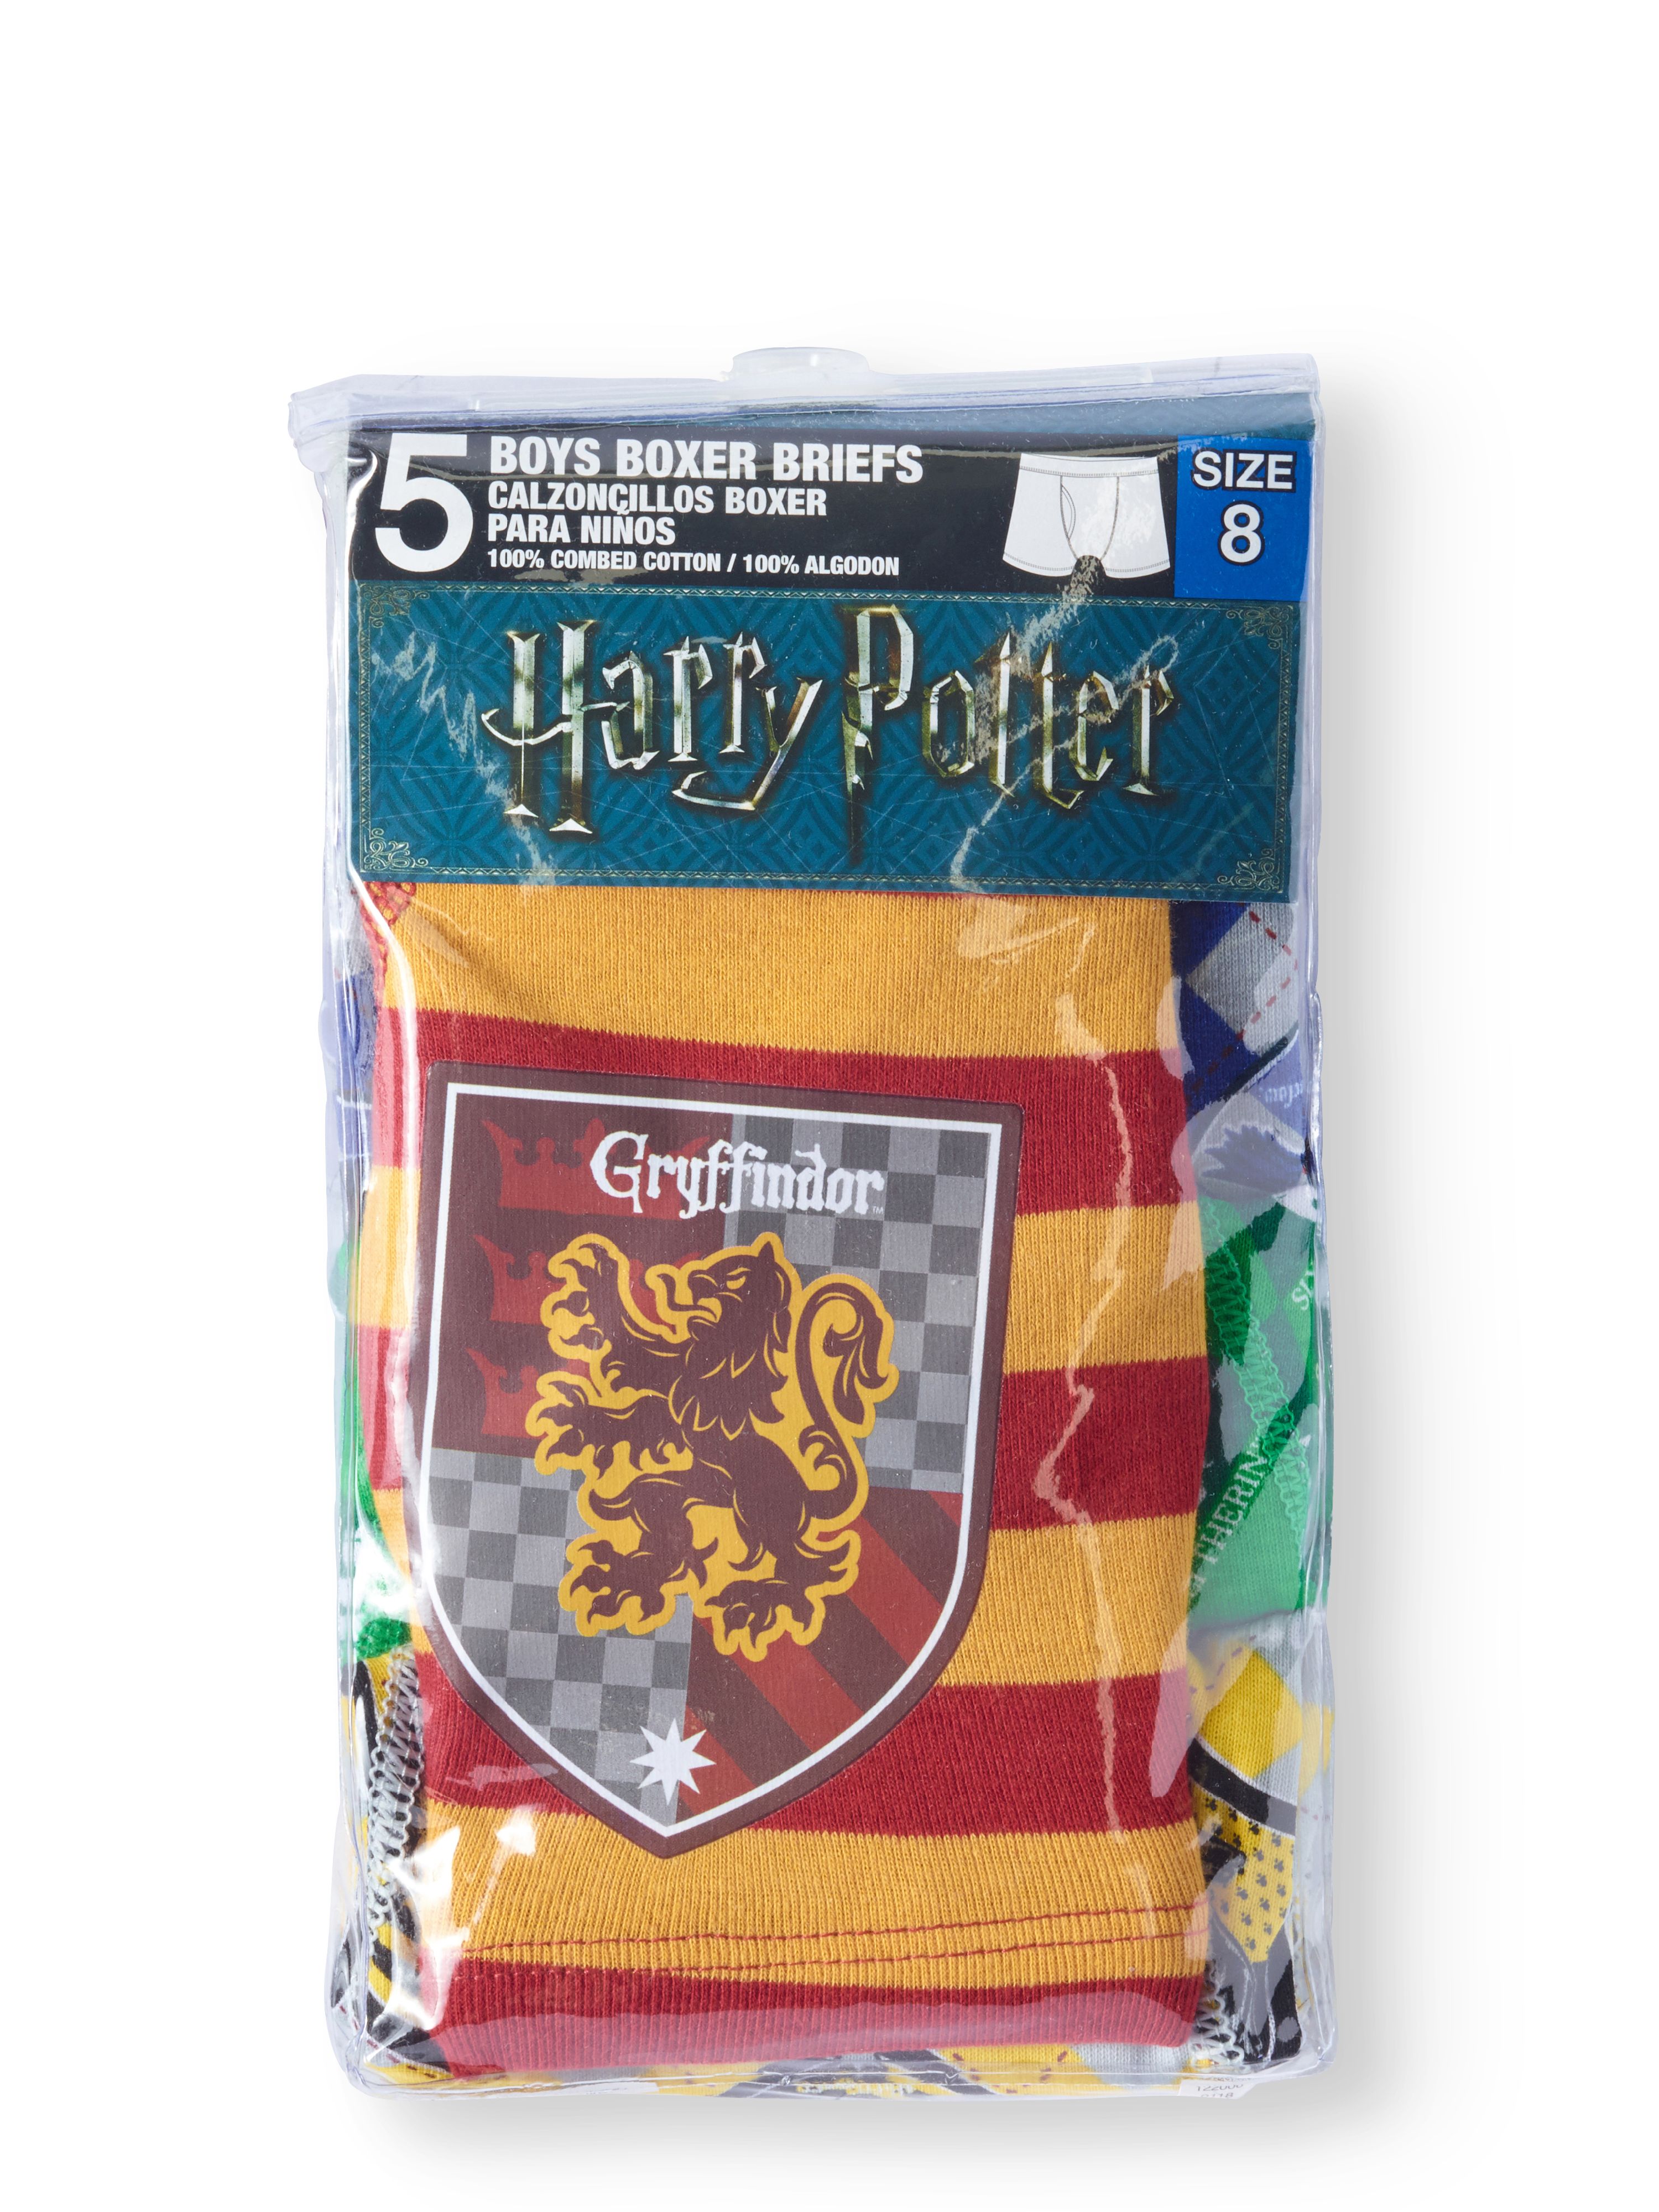 Harry Potter Boys Underwear, 5 Pack Boxer Briefs Sizes 4-8 - image 2 of 2